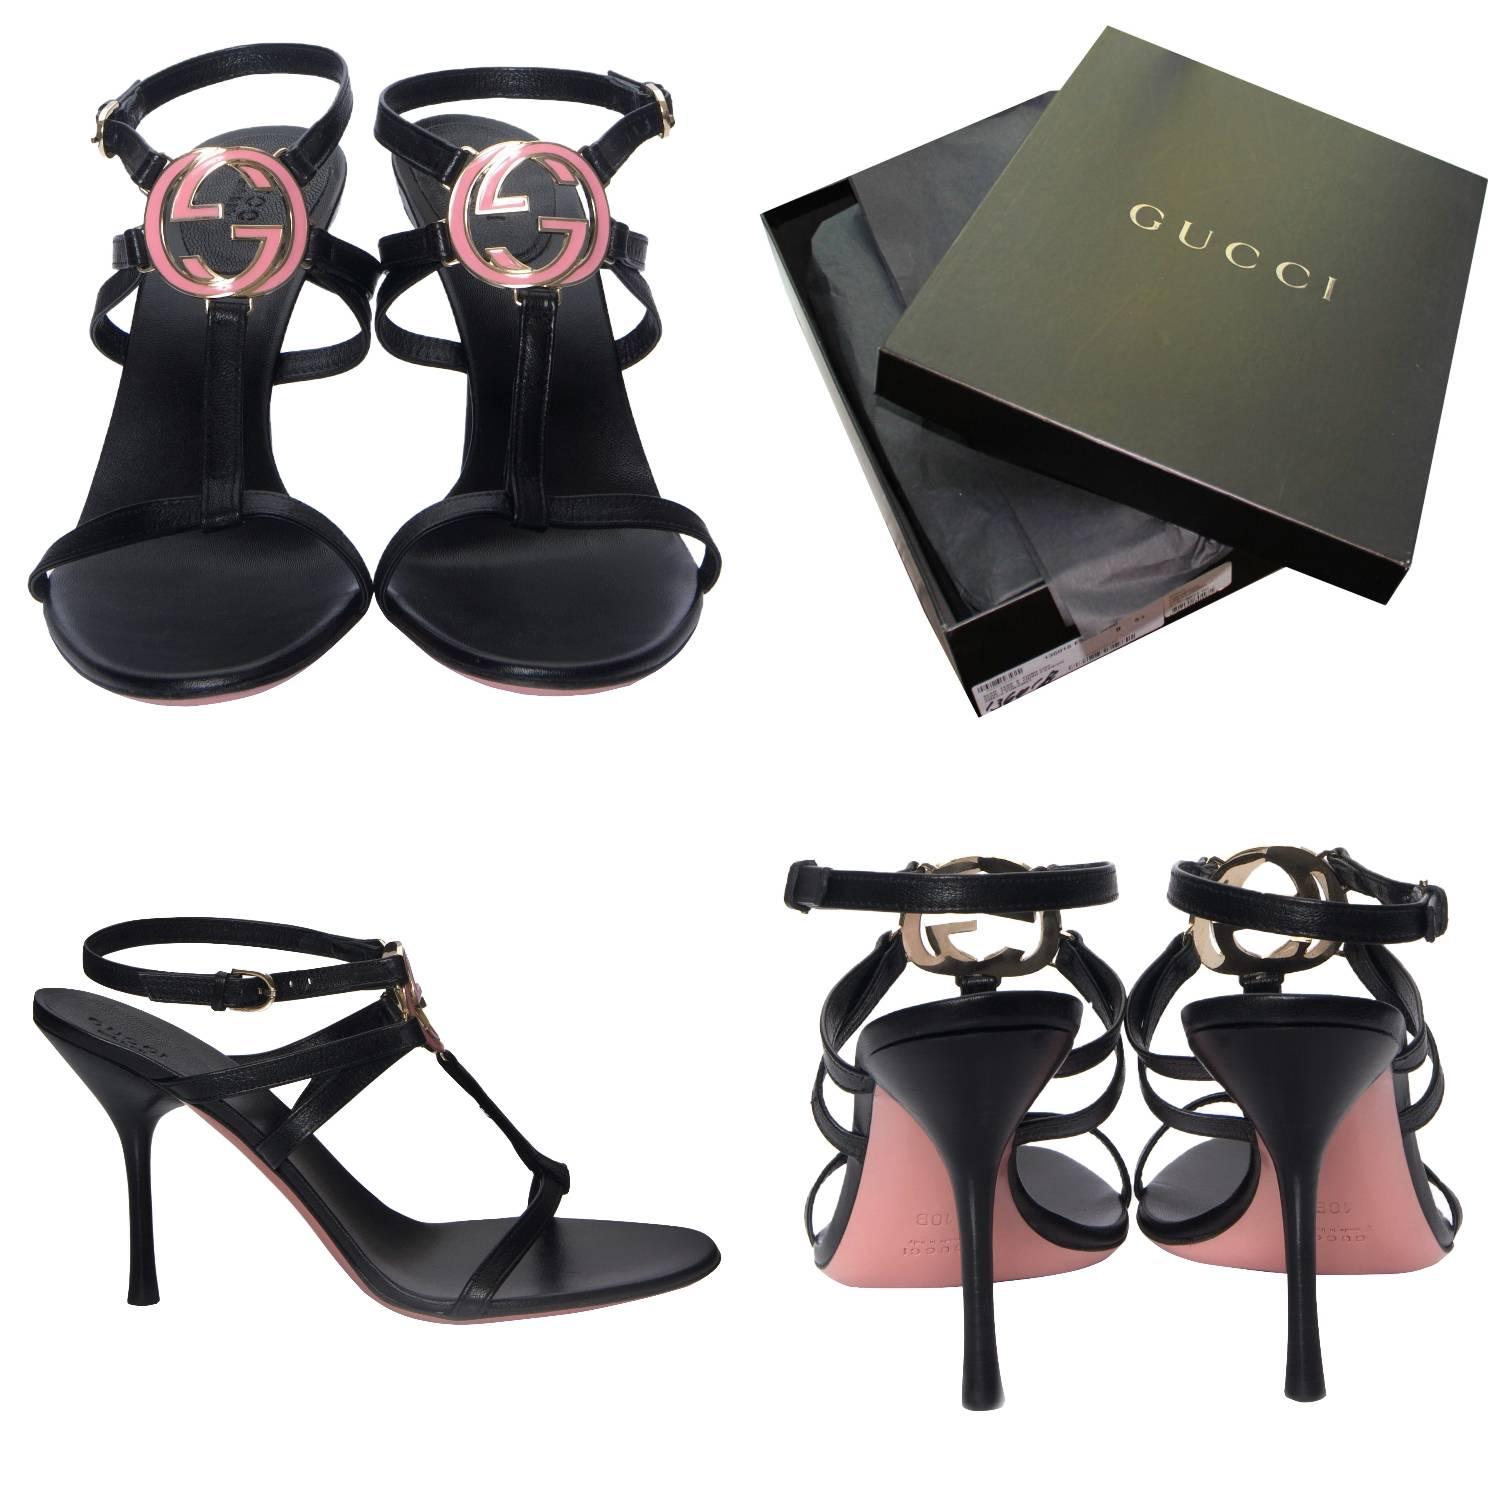 Gucci GG Logo Heels
Brand New
* Stunning in Pink & Black
* Pink & Gold GG Logo Front 
* Size: 10
* Adjustable Ankle Strap
* Leather Insole 
* 4